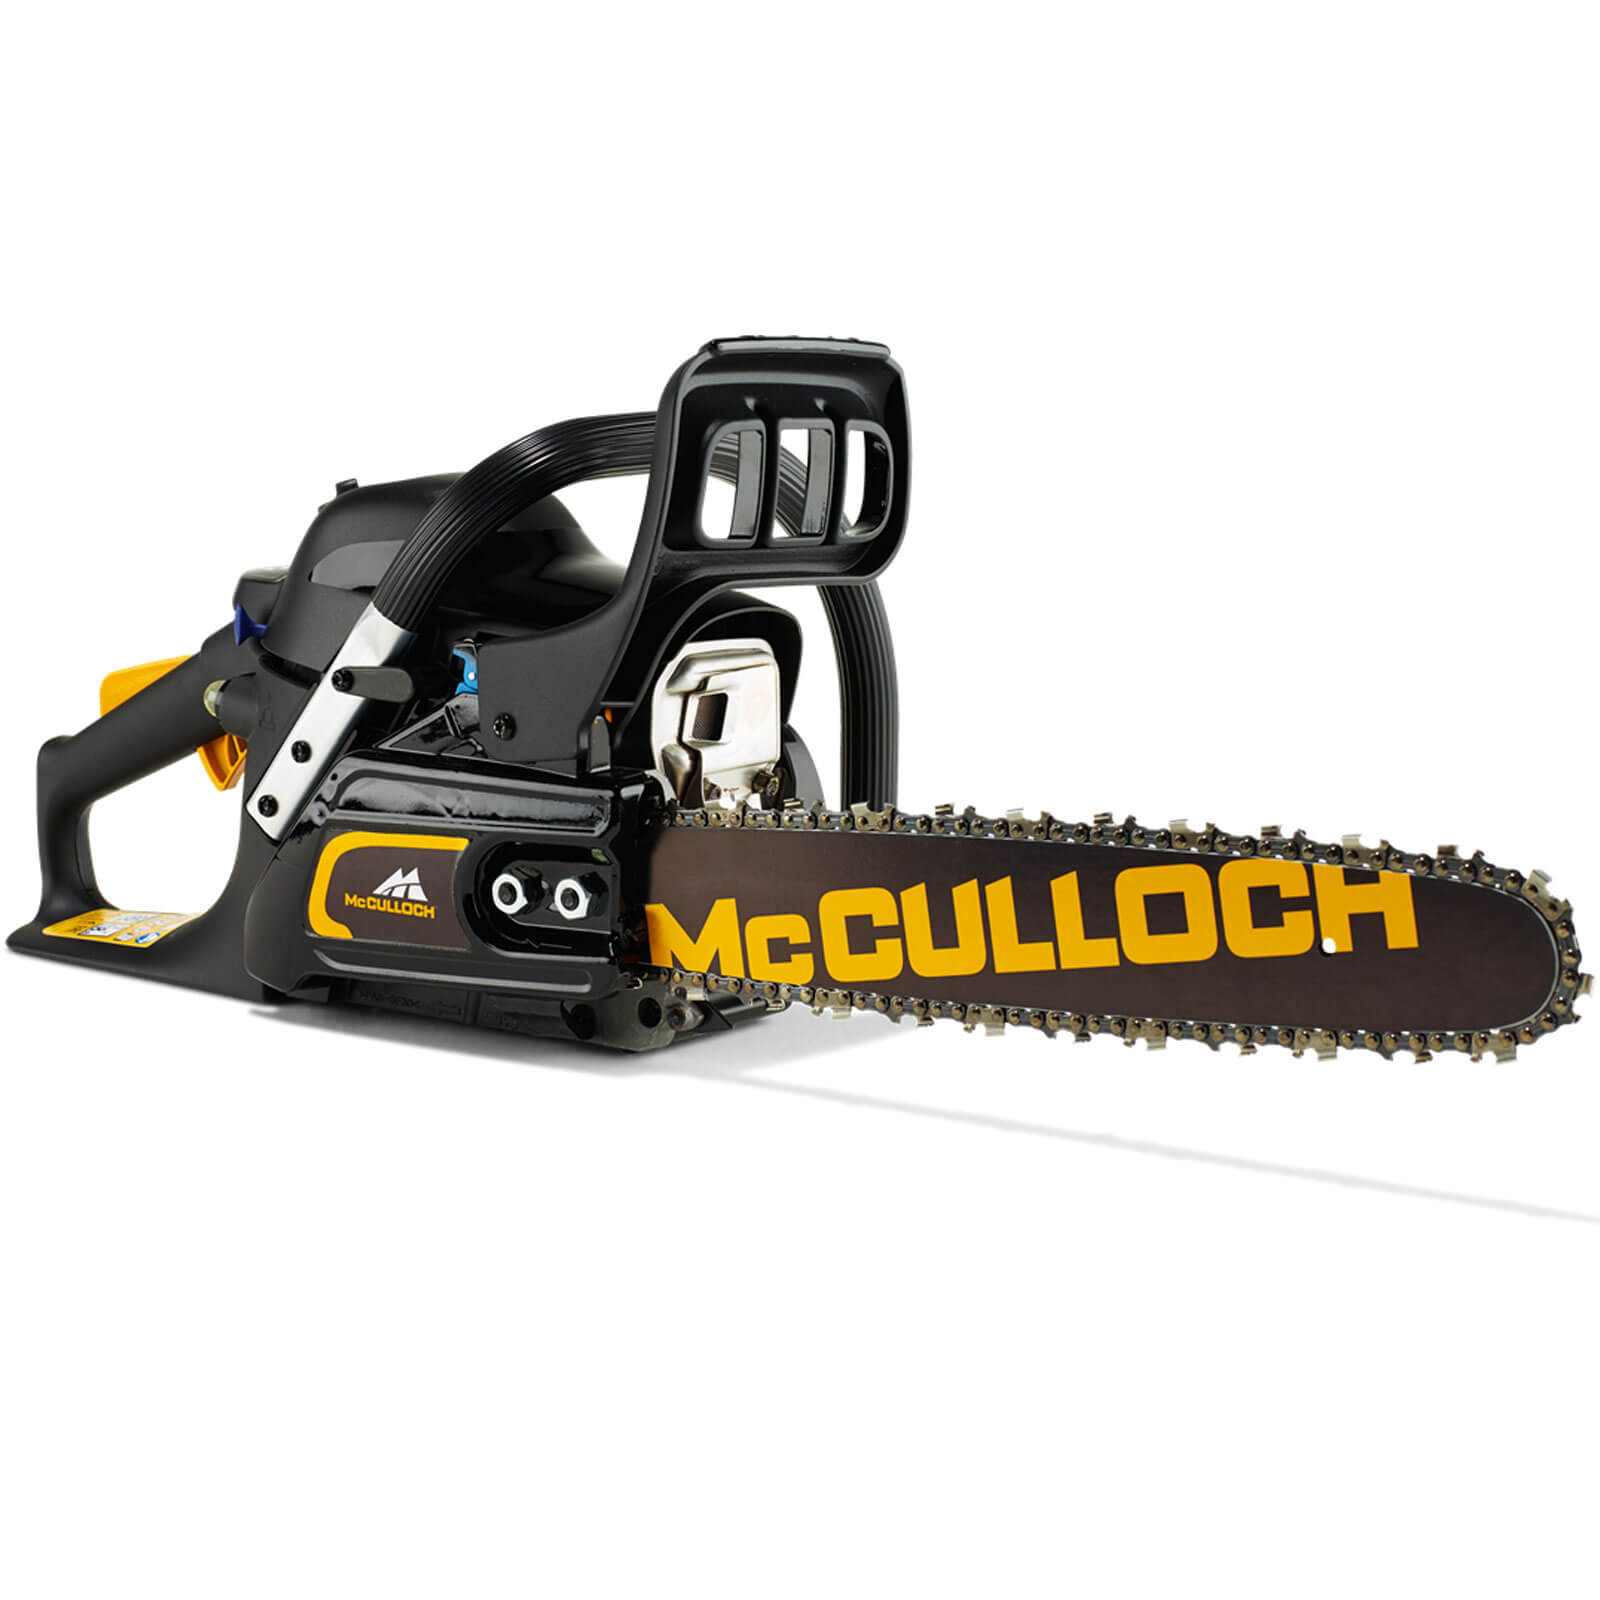 Photo of Mcculloch Cs 35s Petrol Chainsaw 350mm